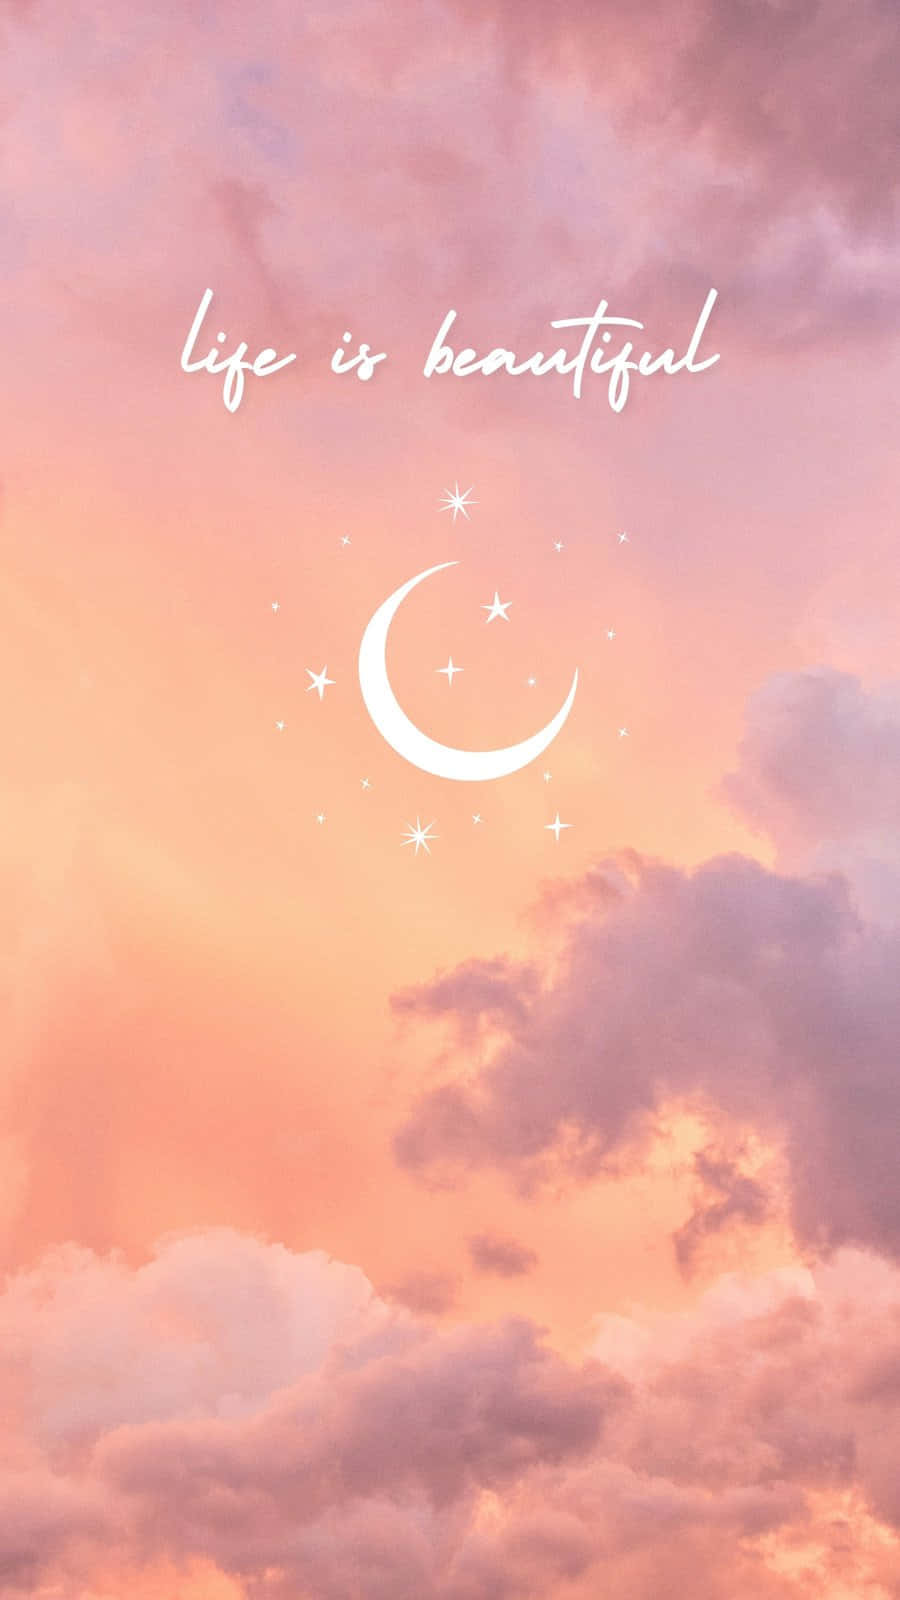 Get Ready For the Day with this Wonderfully Girly Lock Screen Wallpaper